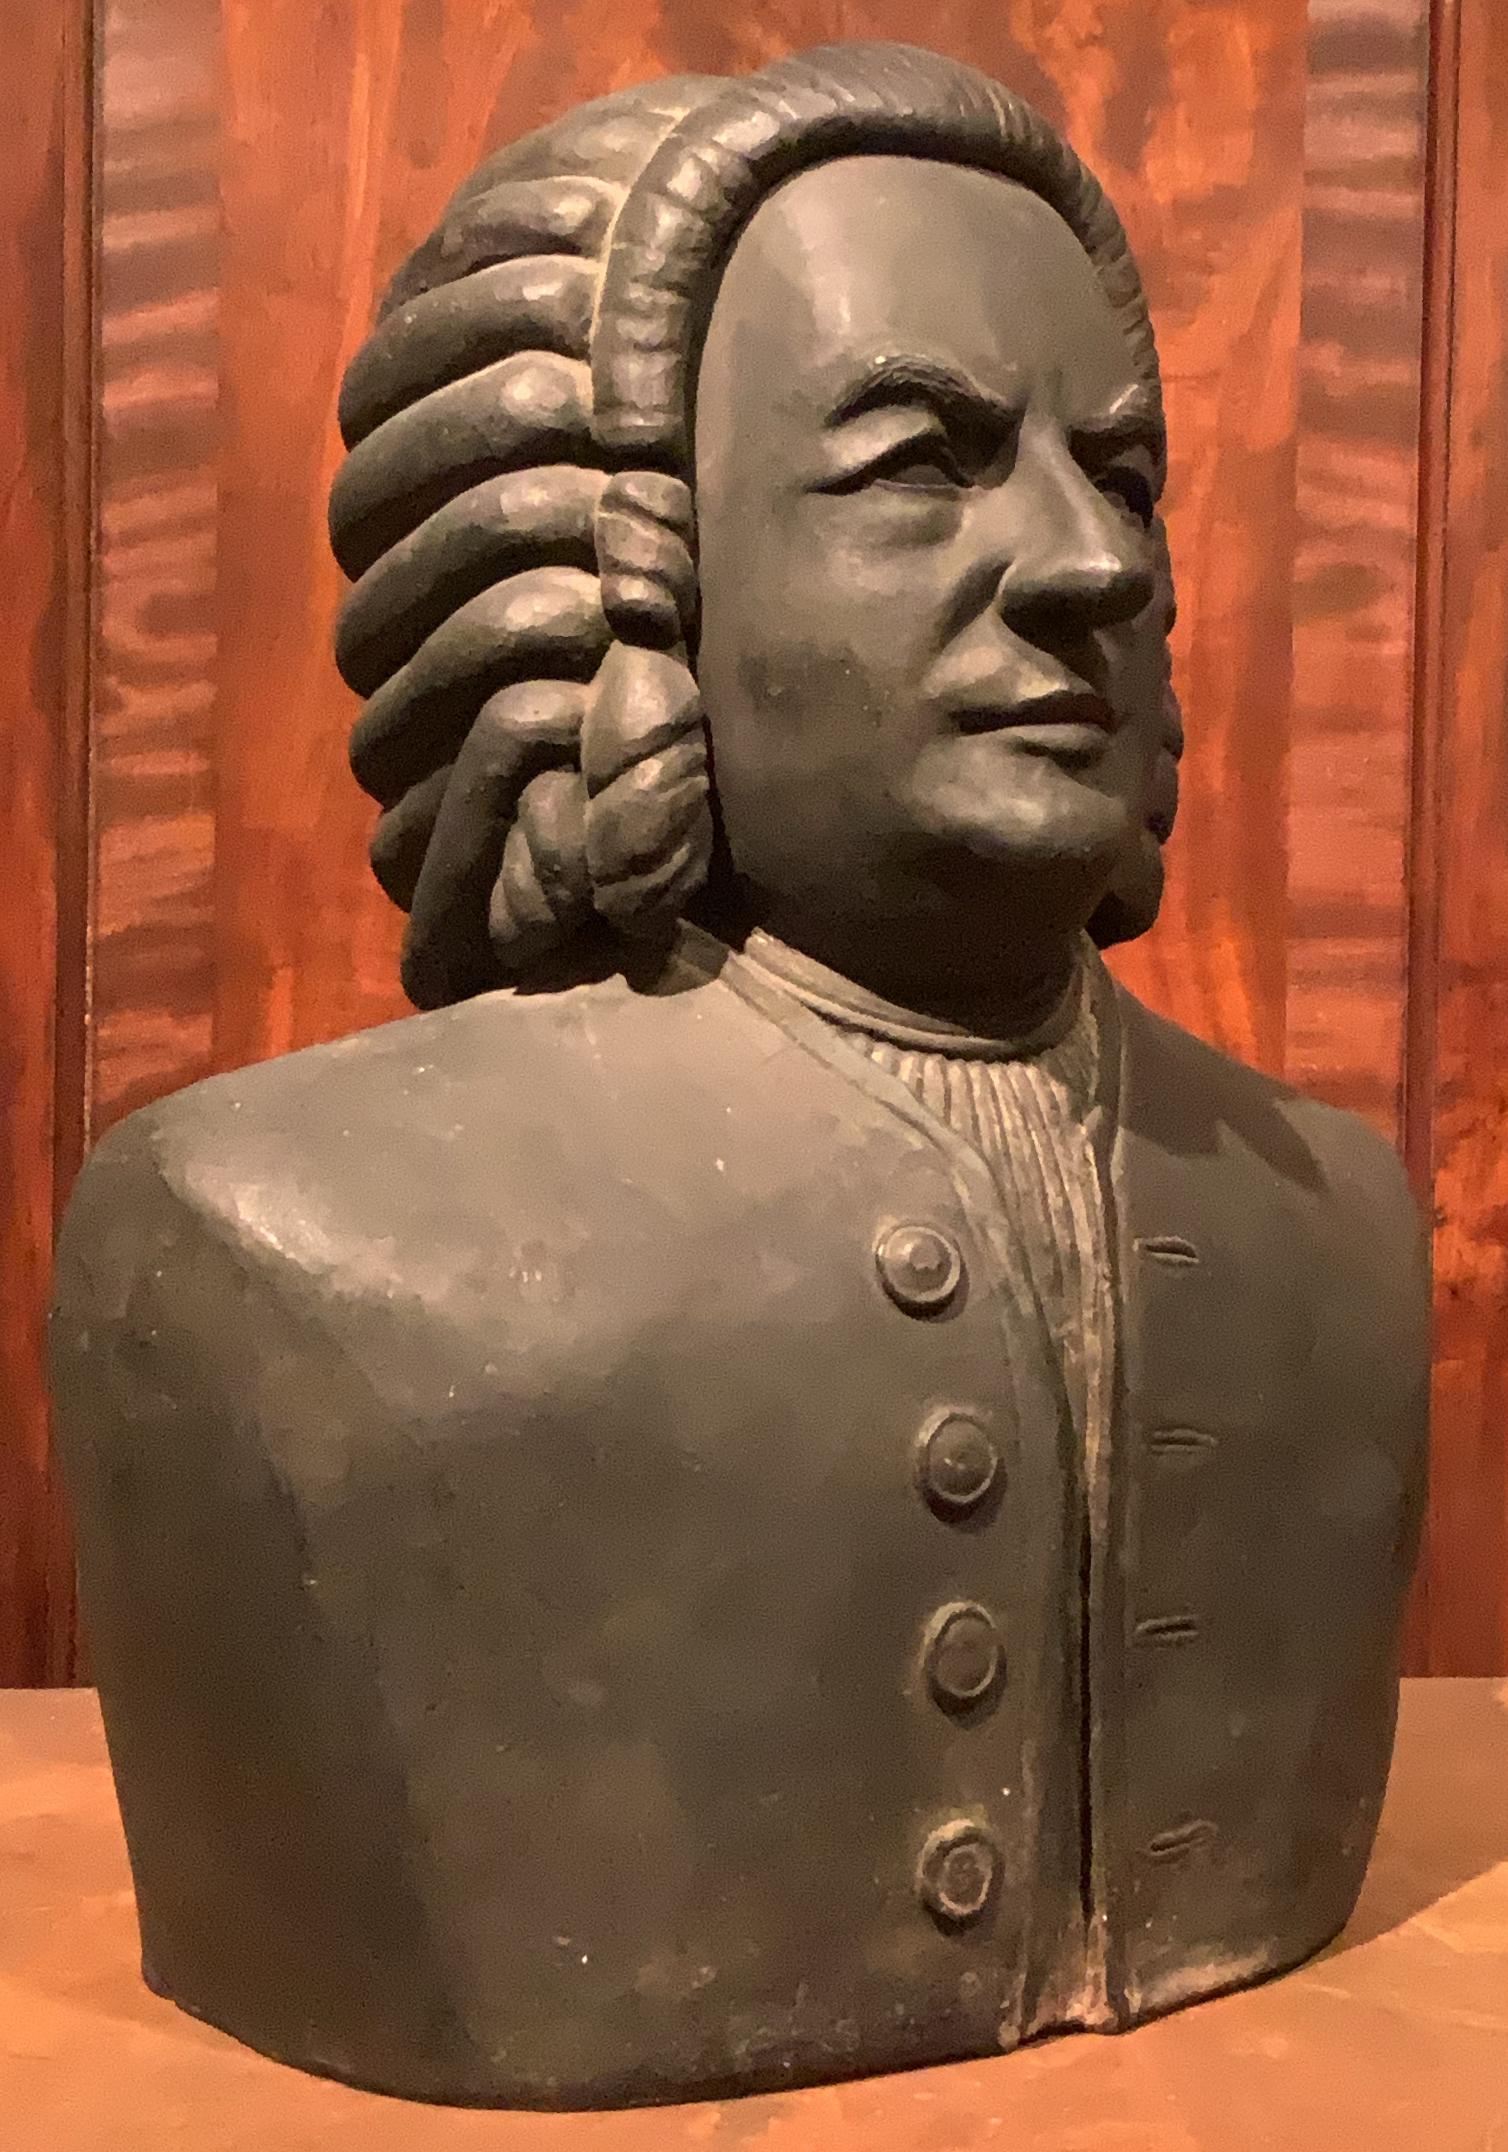 A wonderful and charming 1940's artist-made terracotta bust of composer Johann Sebastian Bach. very handsome form with expressive features and nice scale. in its original matte black painted finish.